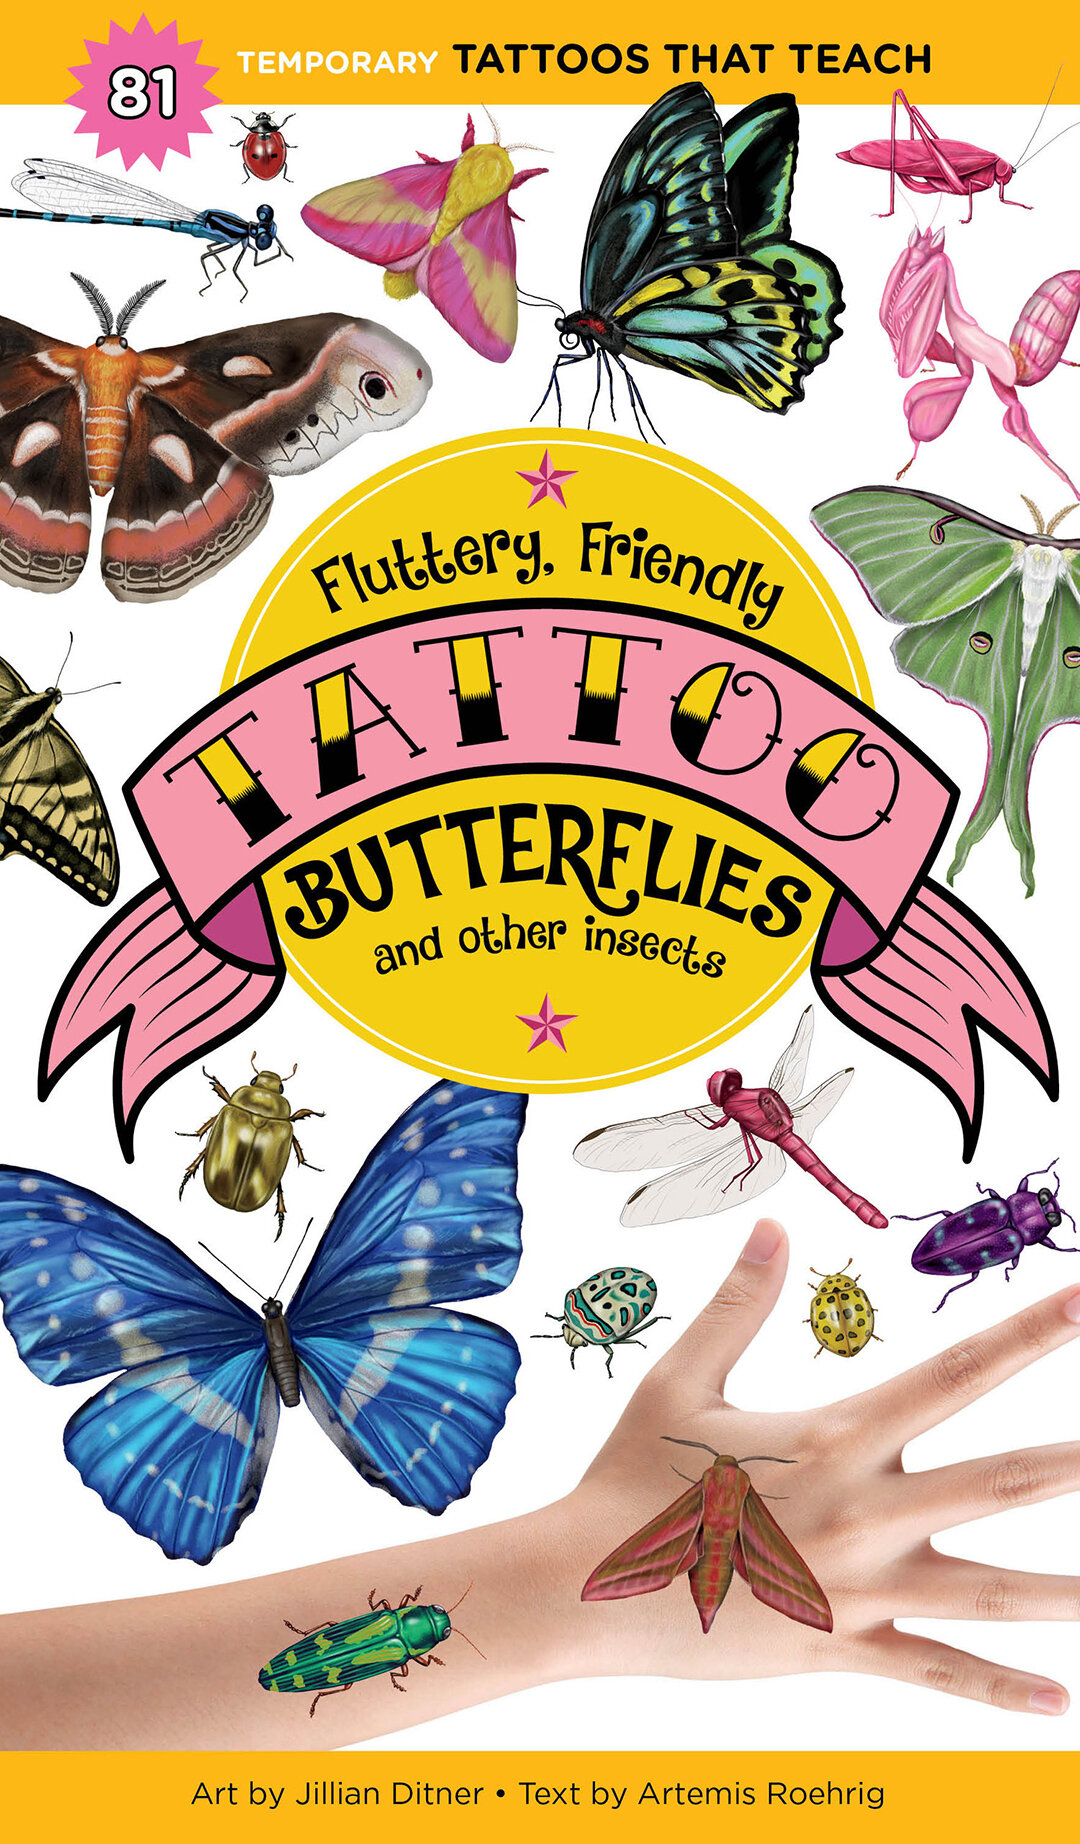 @Jillian+Ditner+Illustration+Fluttery,+Friendly+Tattoo++Butterflies+and+other+Insects.jpg